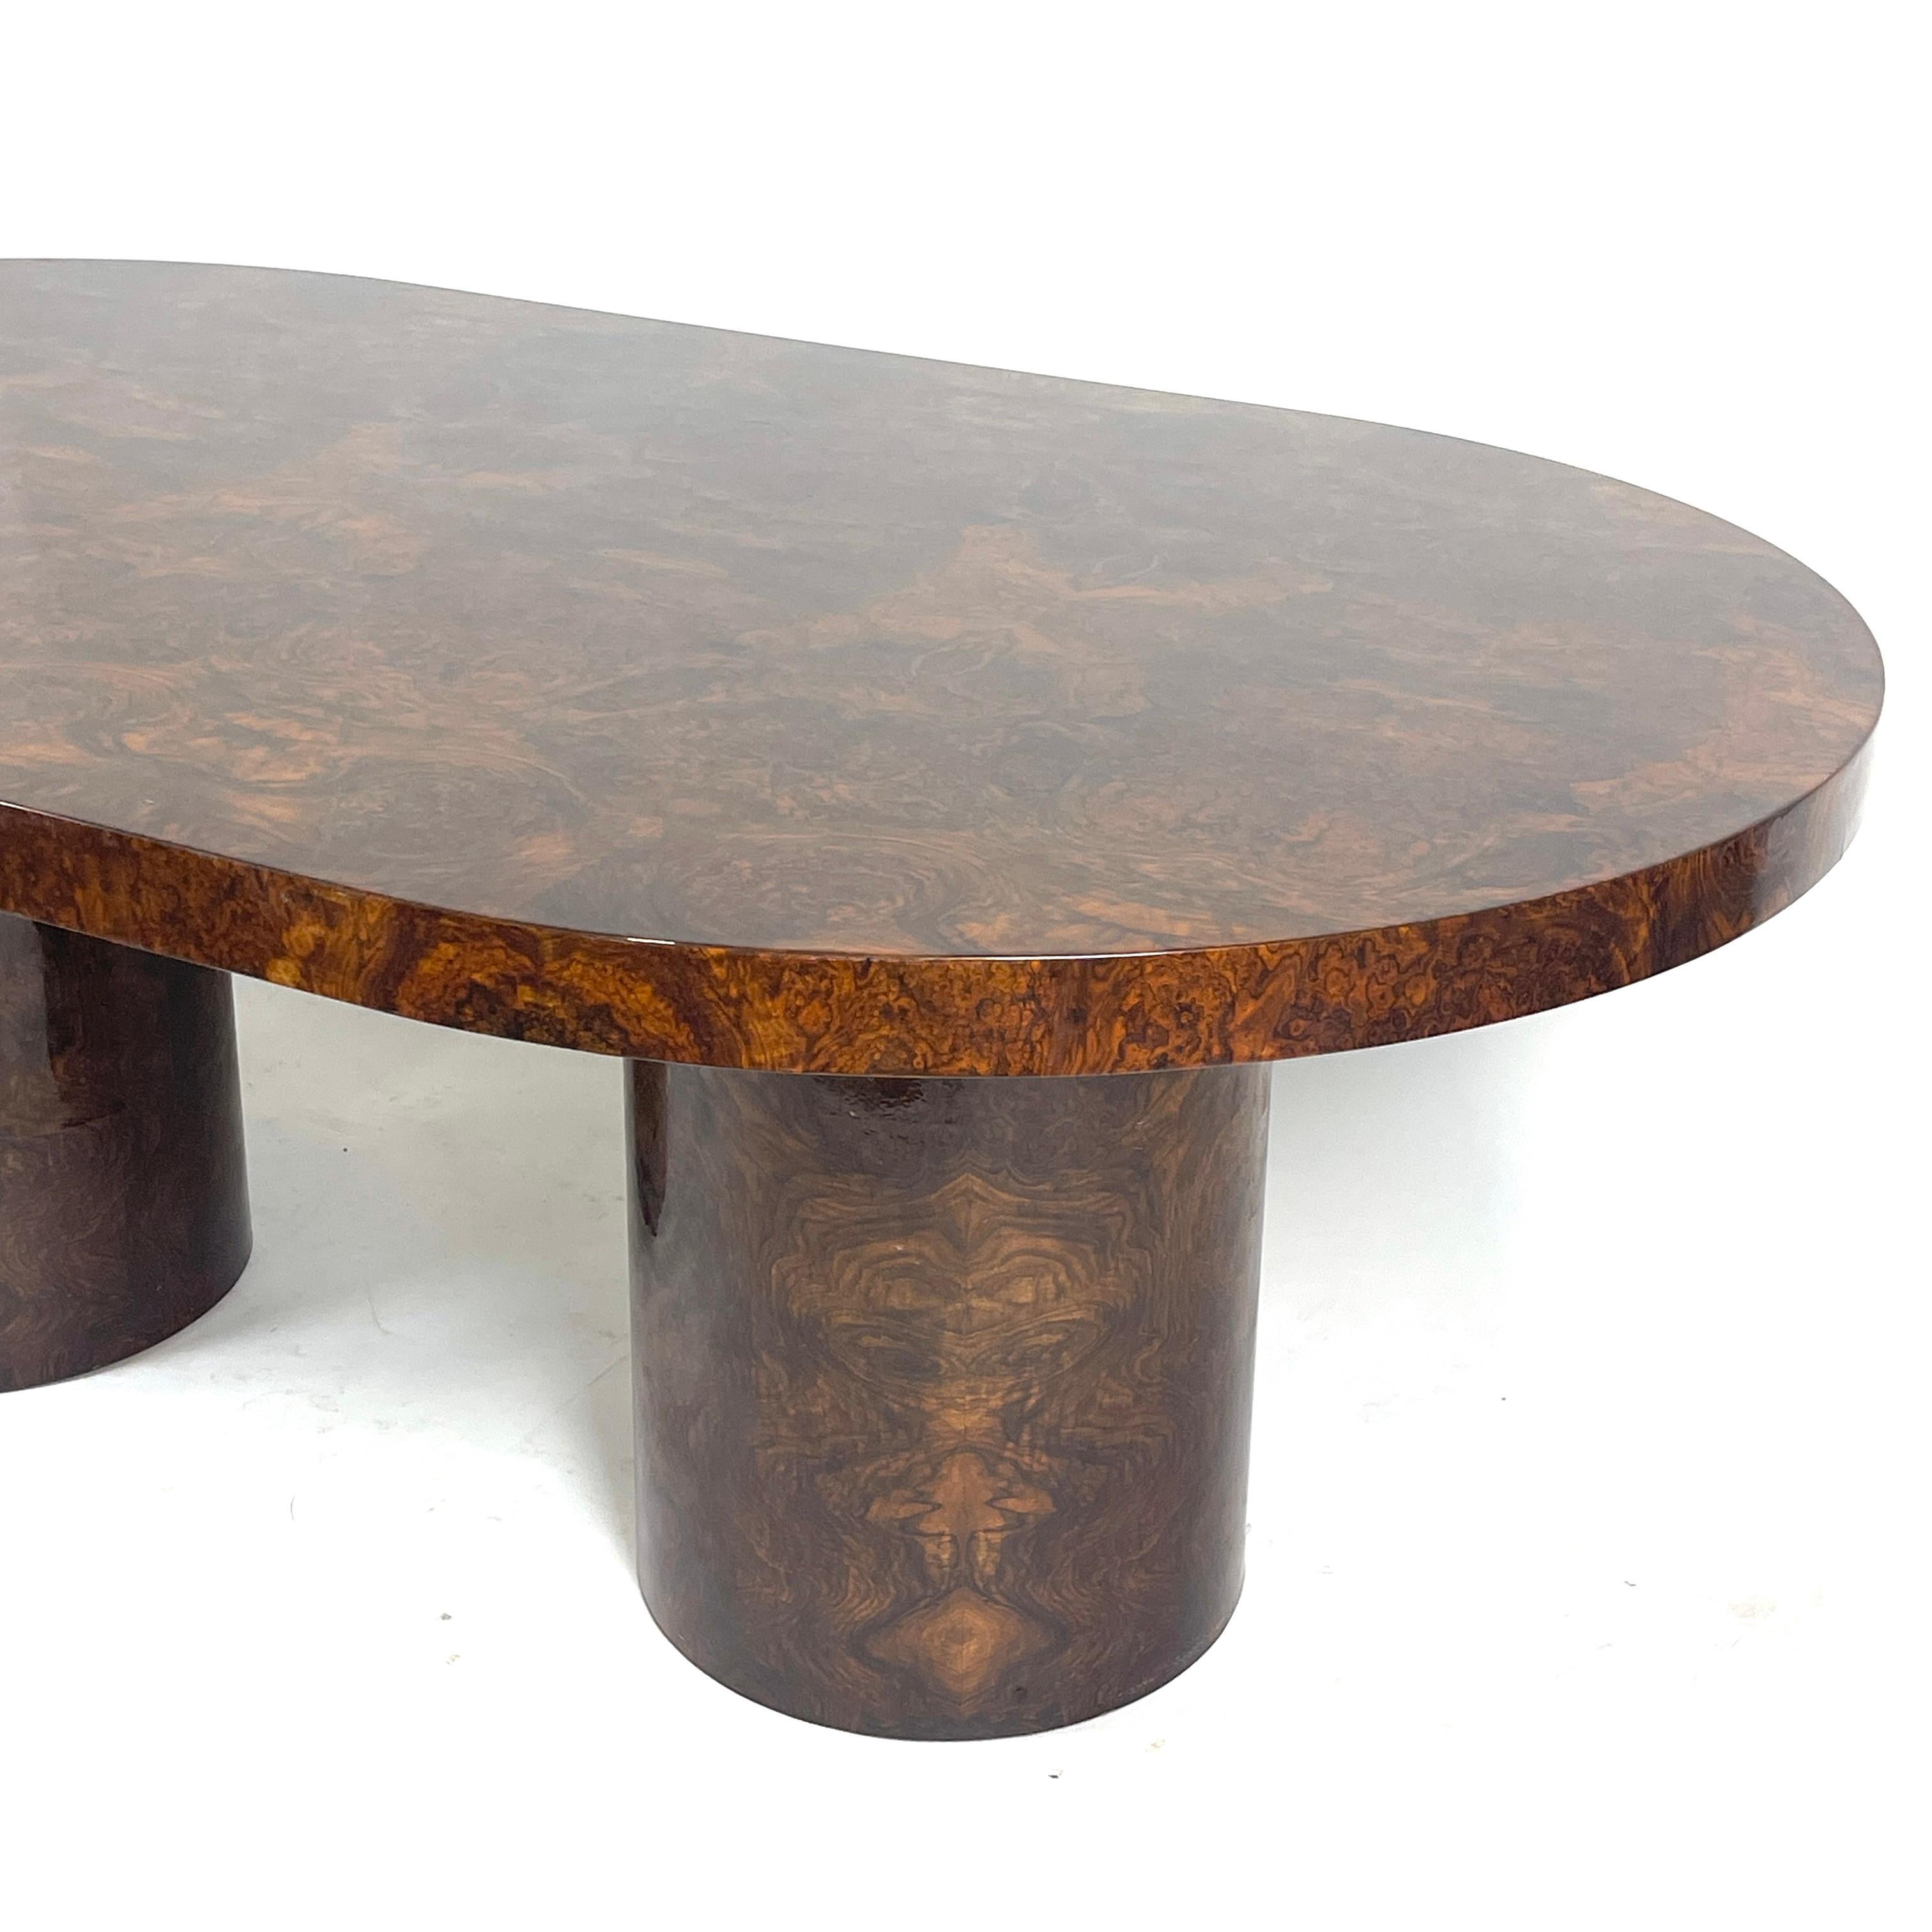 Lacquered Burled Mahogany Oval Dining Table by Paul Mayen for Intrex Habitat 9